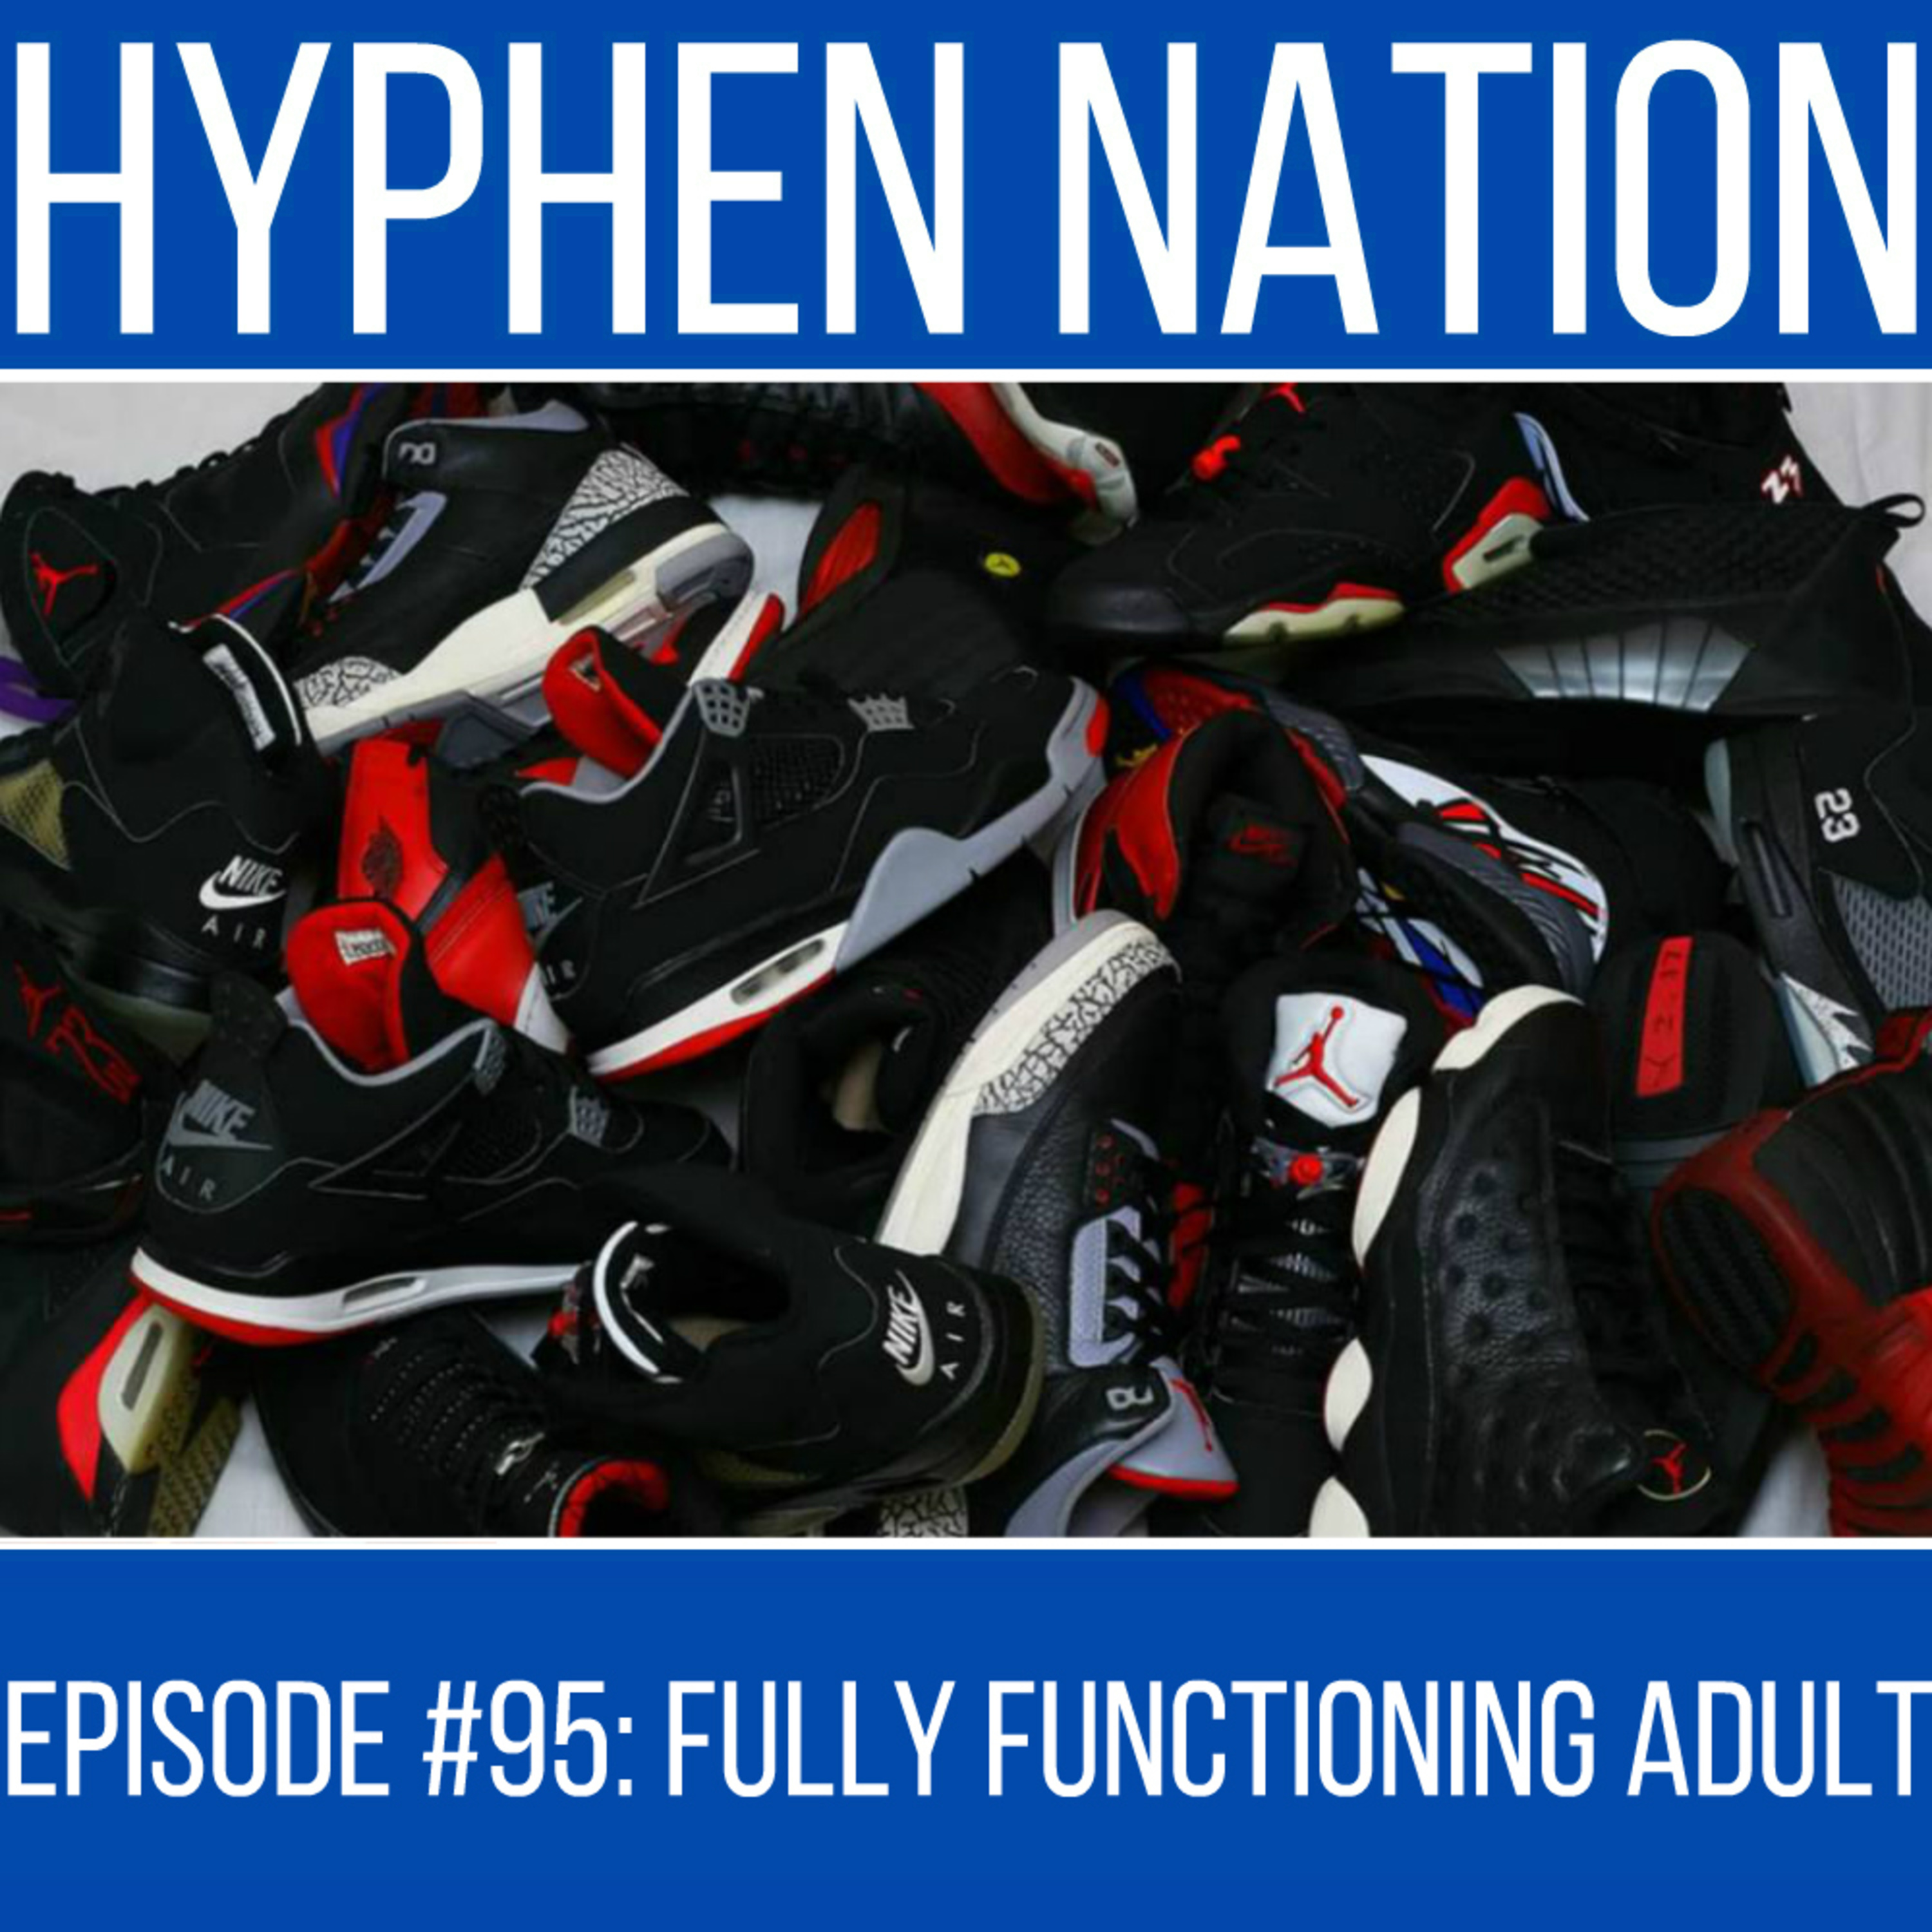 Episode #95: Fully Functioning Adult